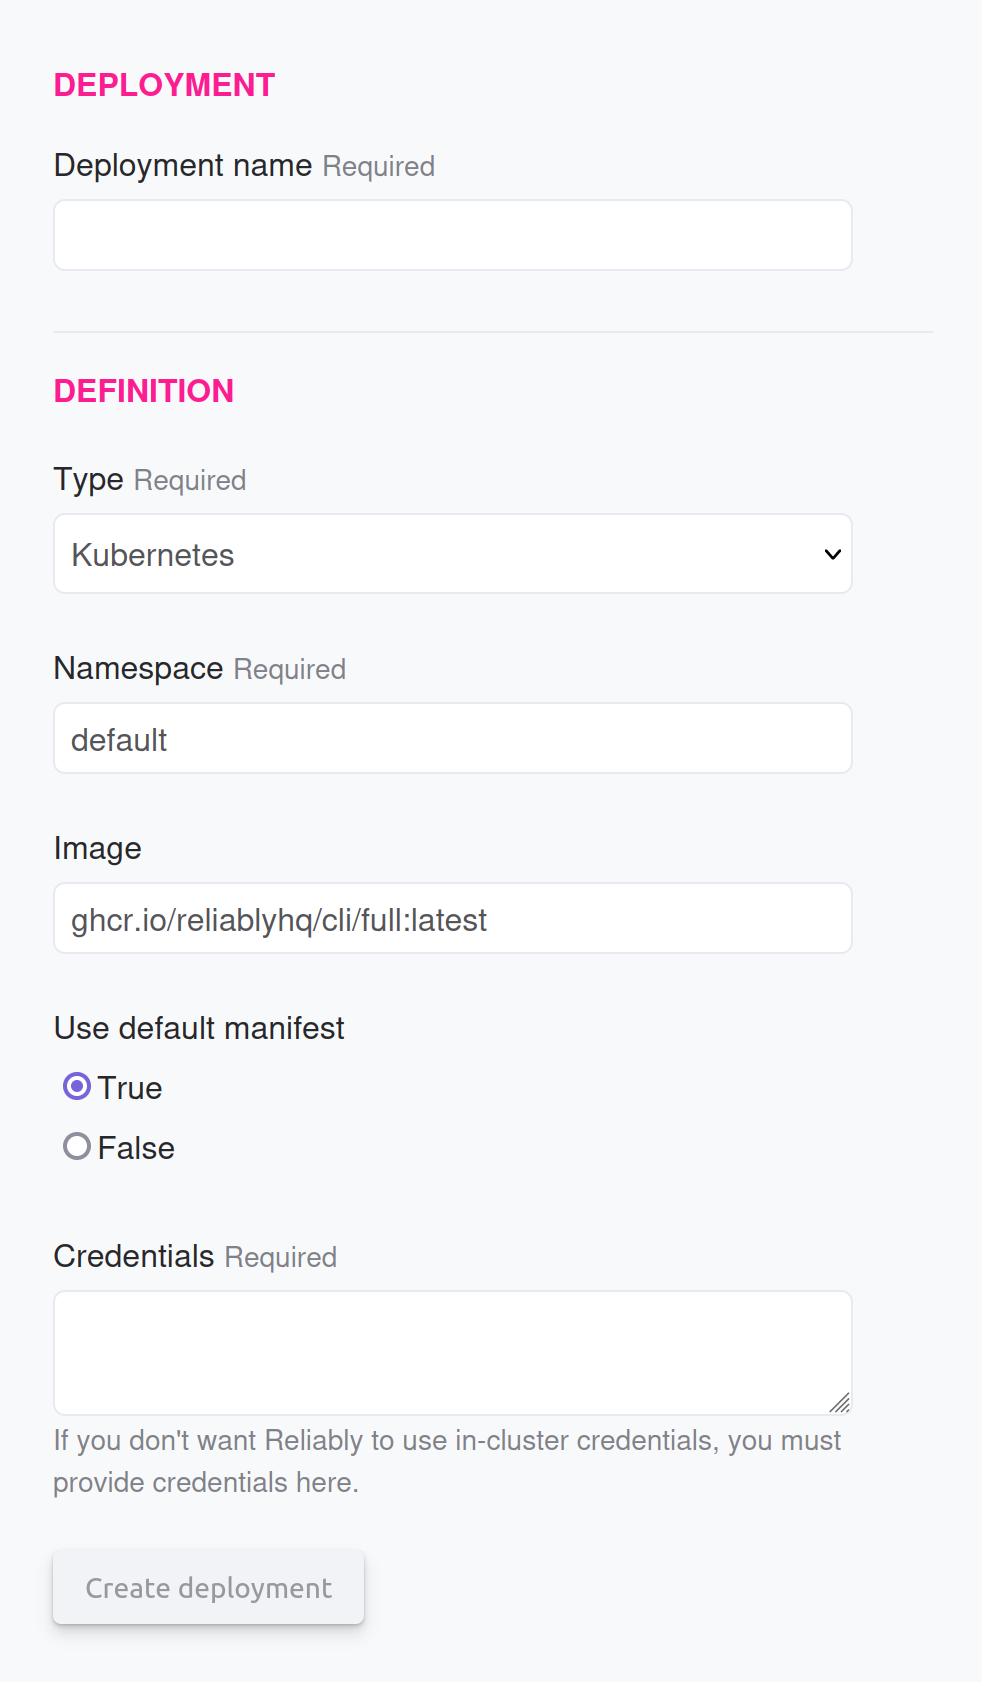 A screenshot of the Reliably Kubernetes environment form.